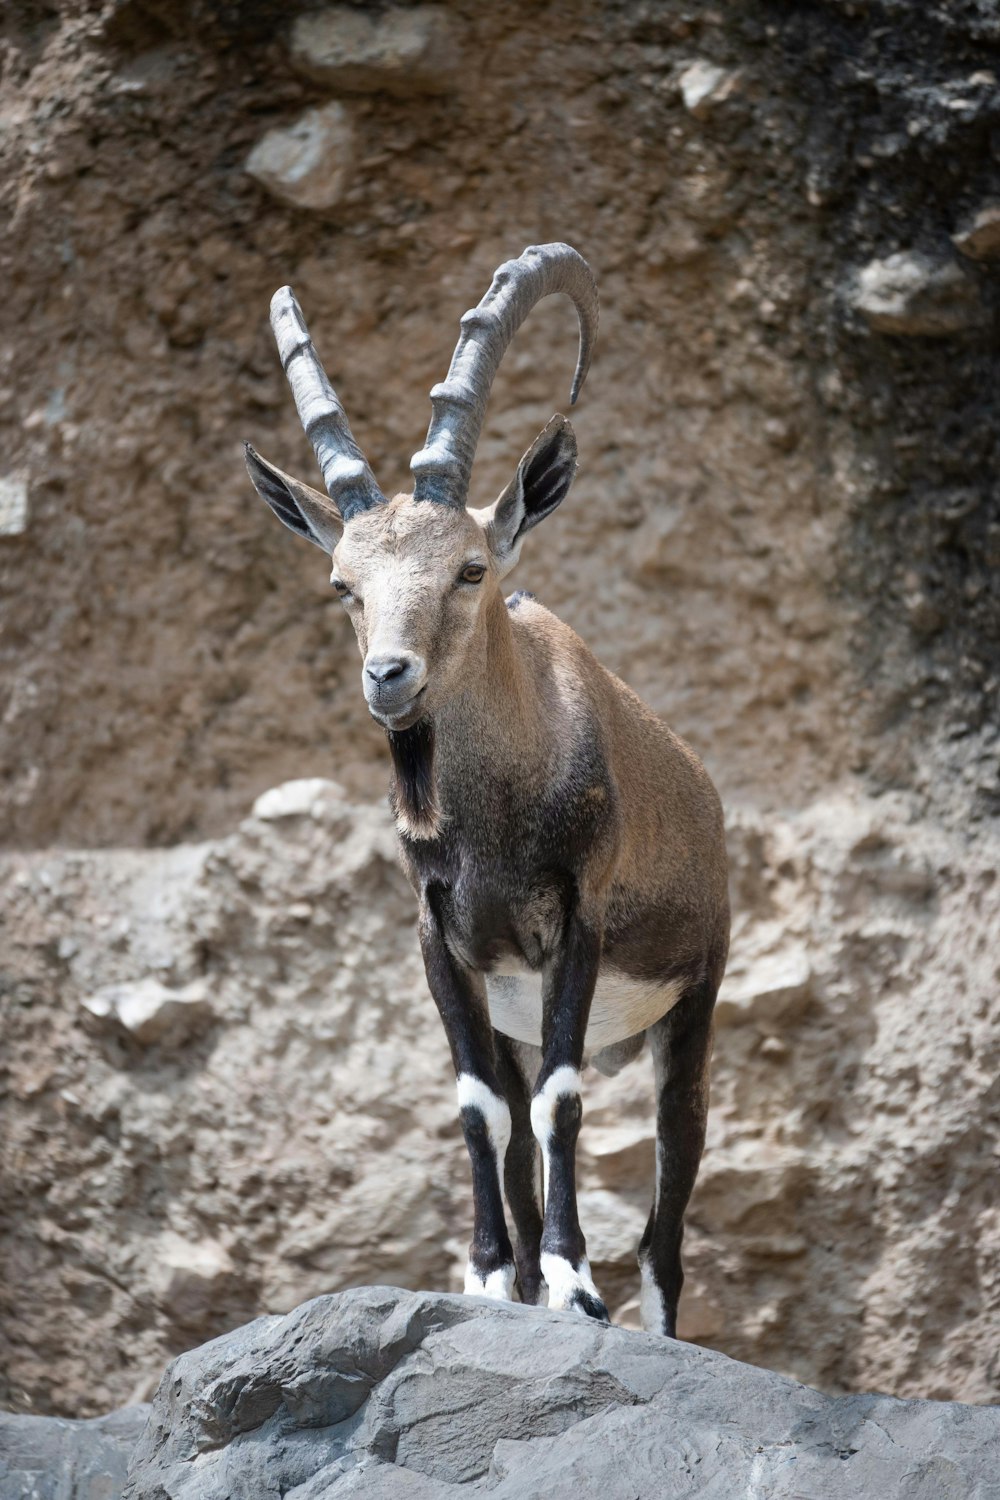 an animal with long horns standing on a rock